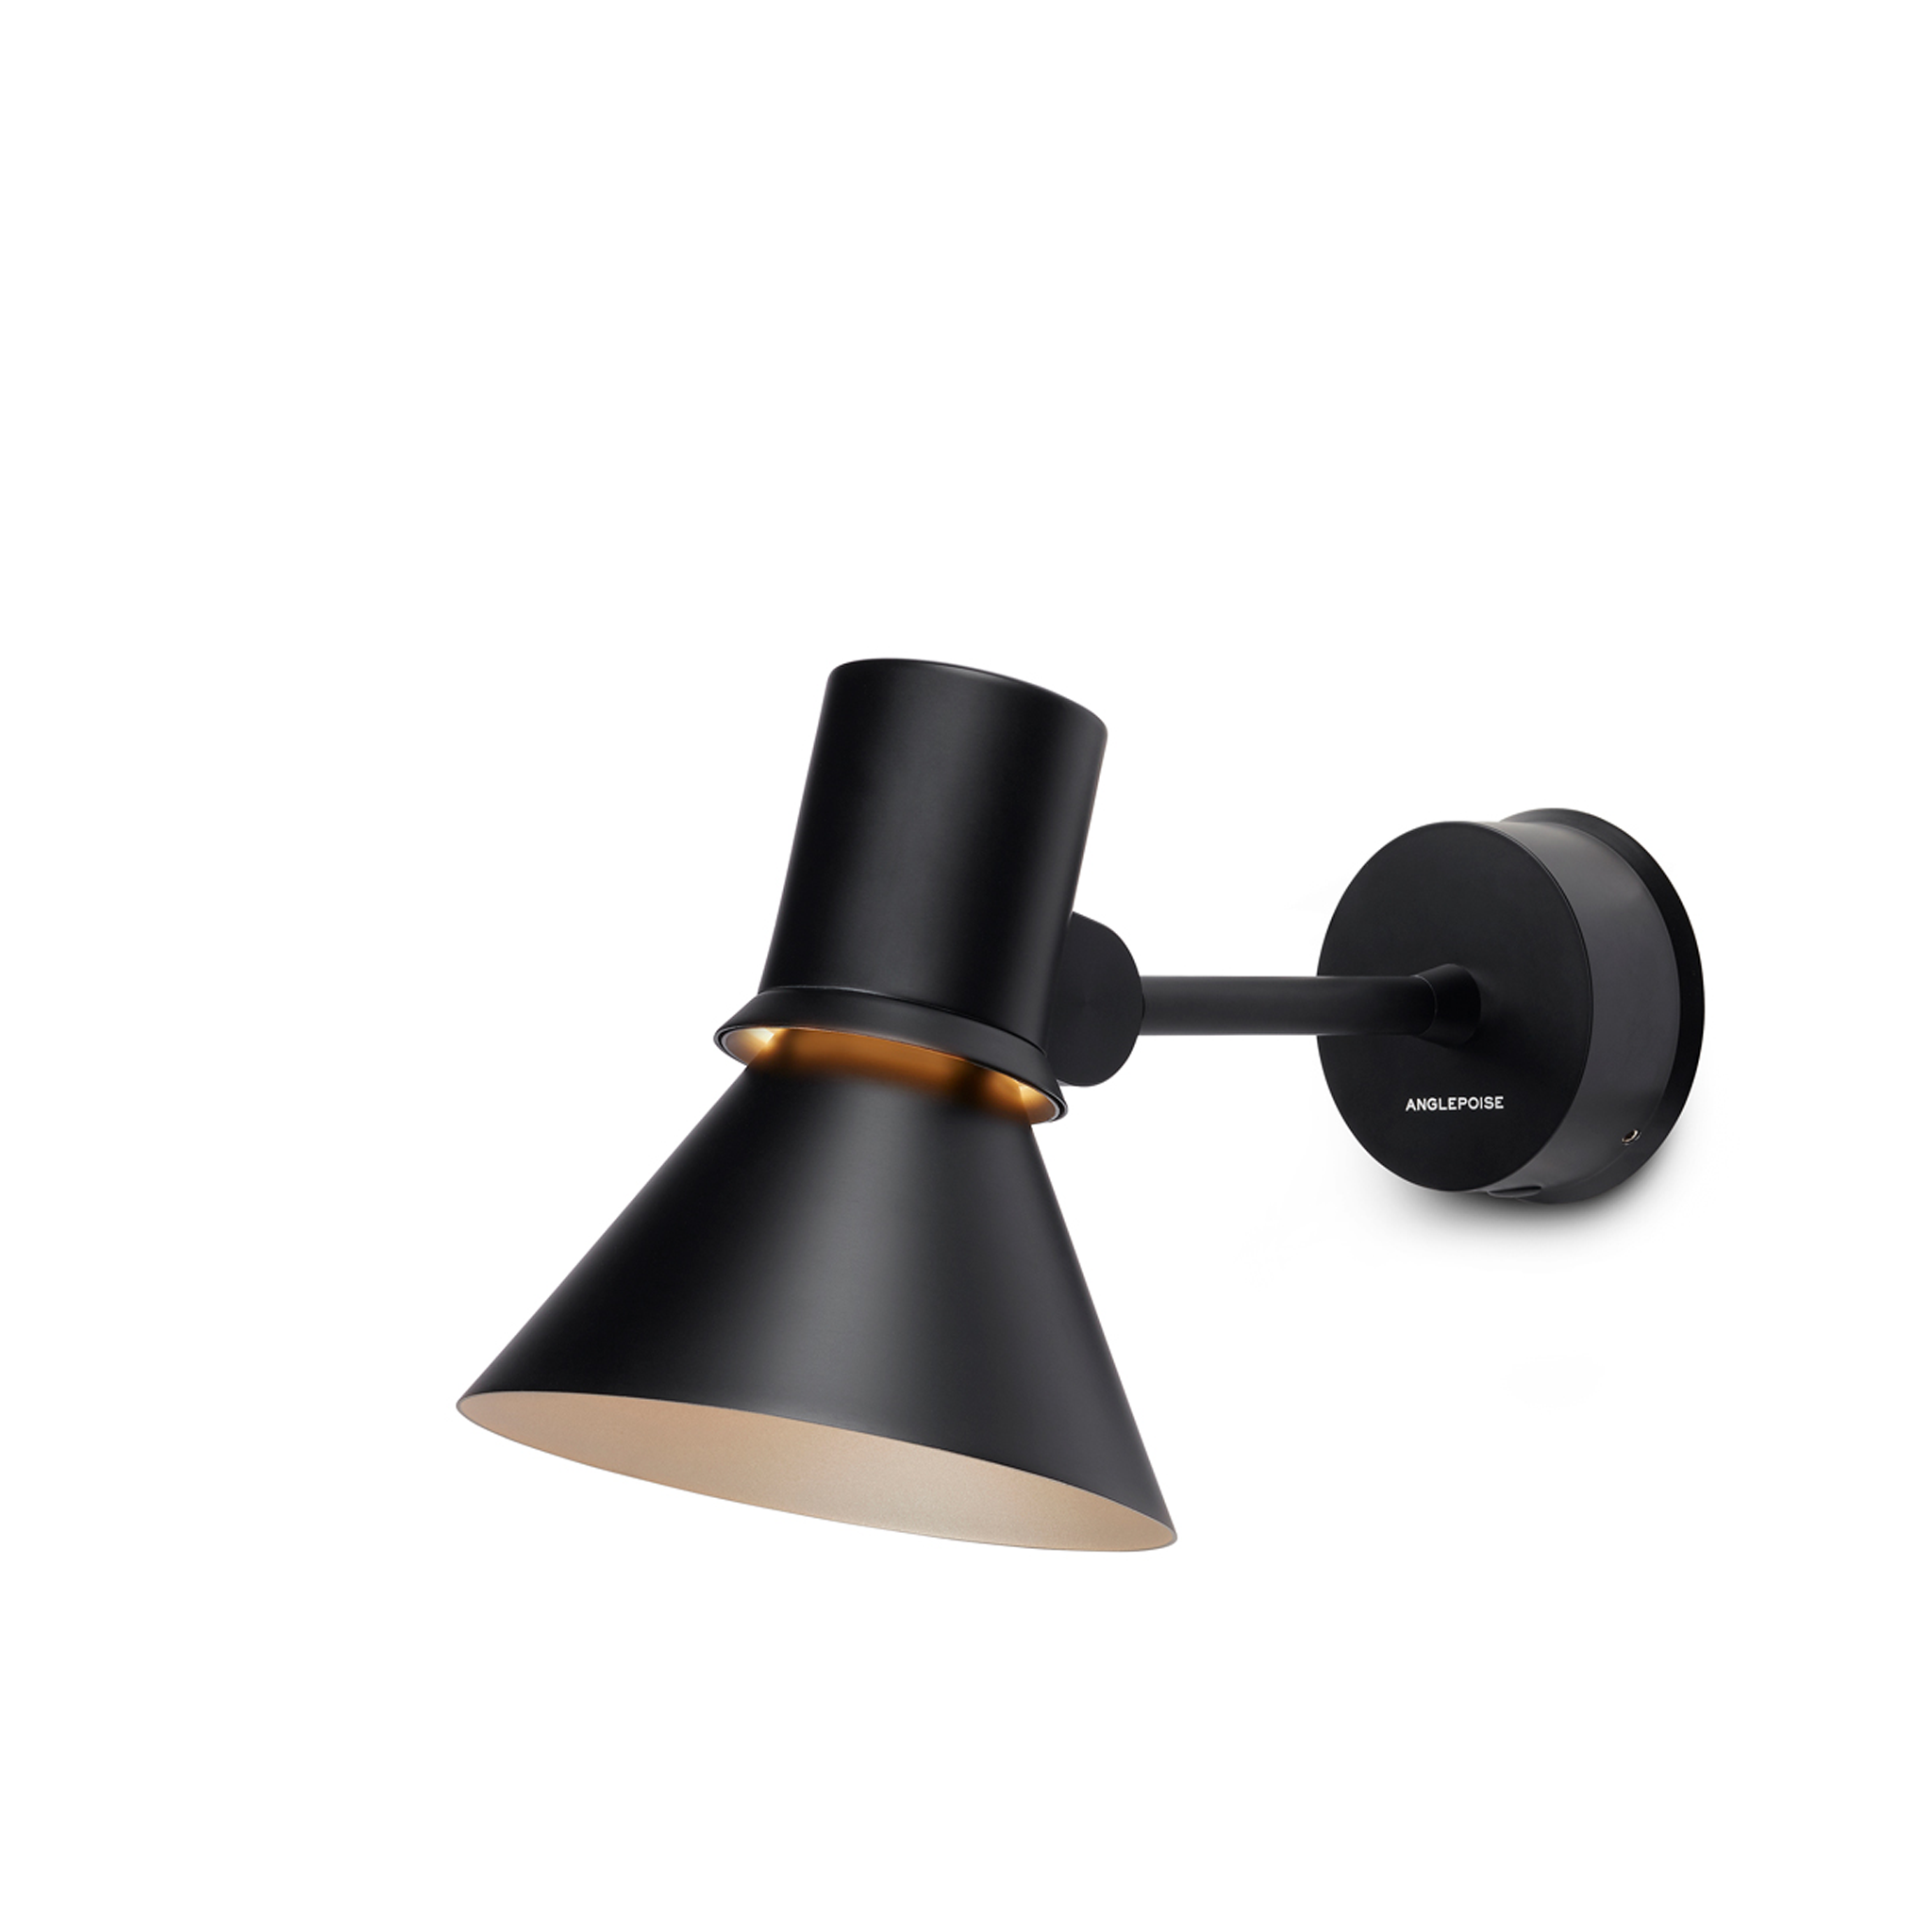 Type 80 W1 Wall Lamp by Kenneth Grange for Anglepoise